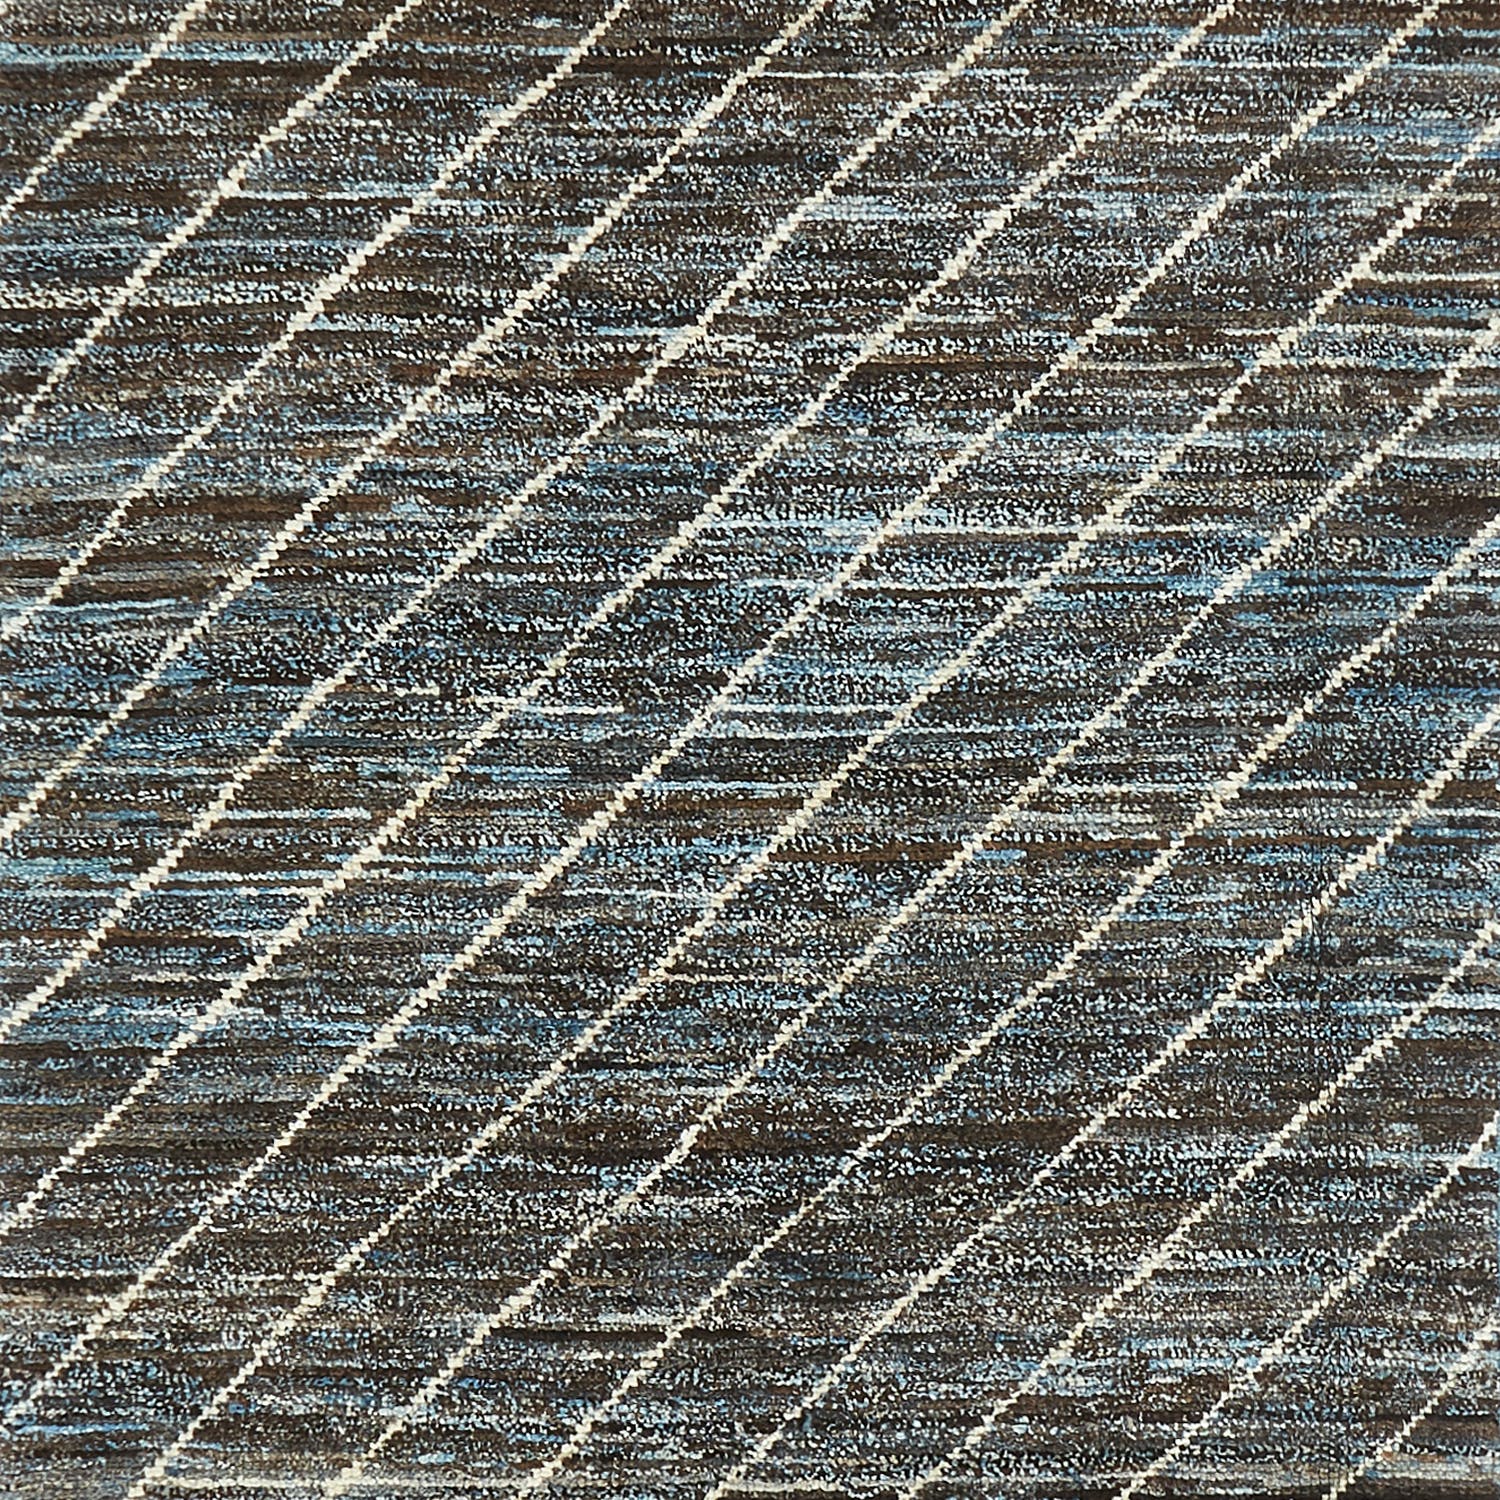 Patterned fabric with diagonal lines in brown, cream, and blue.